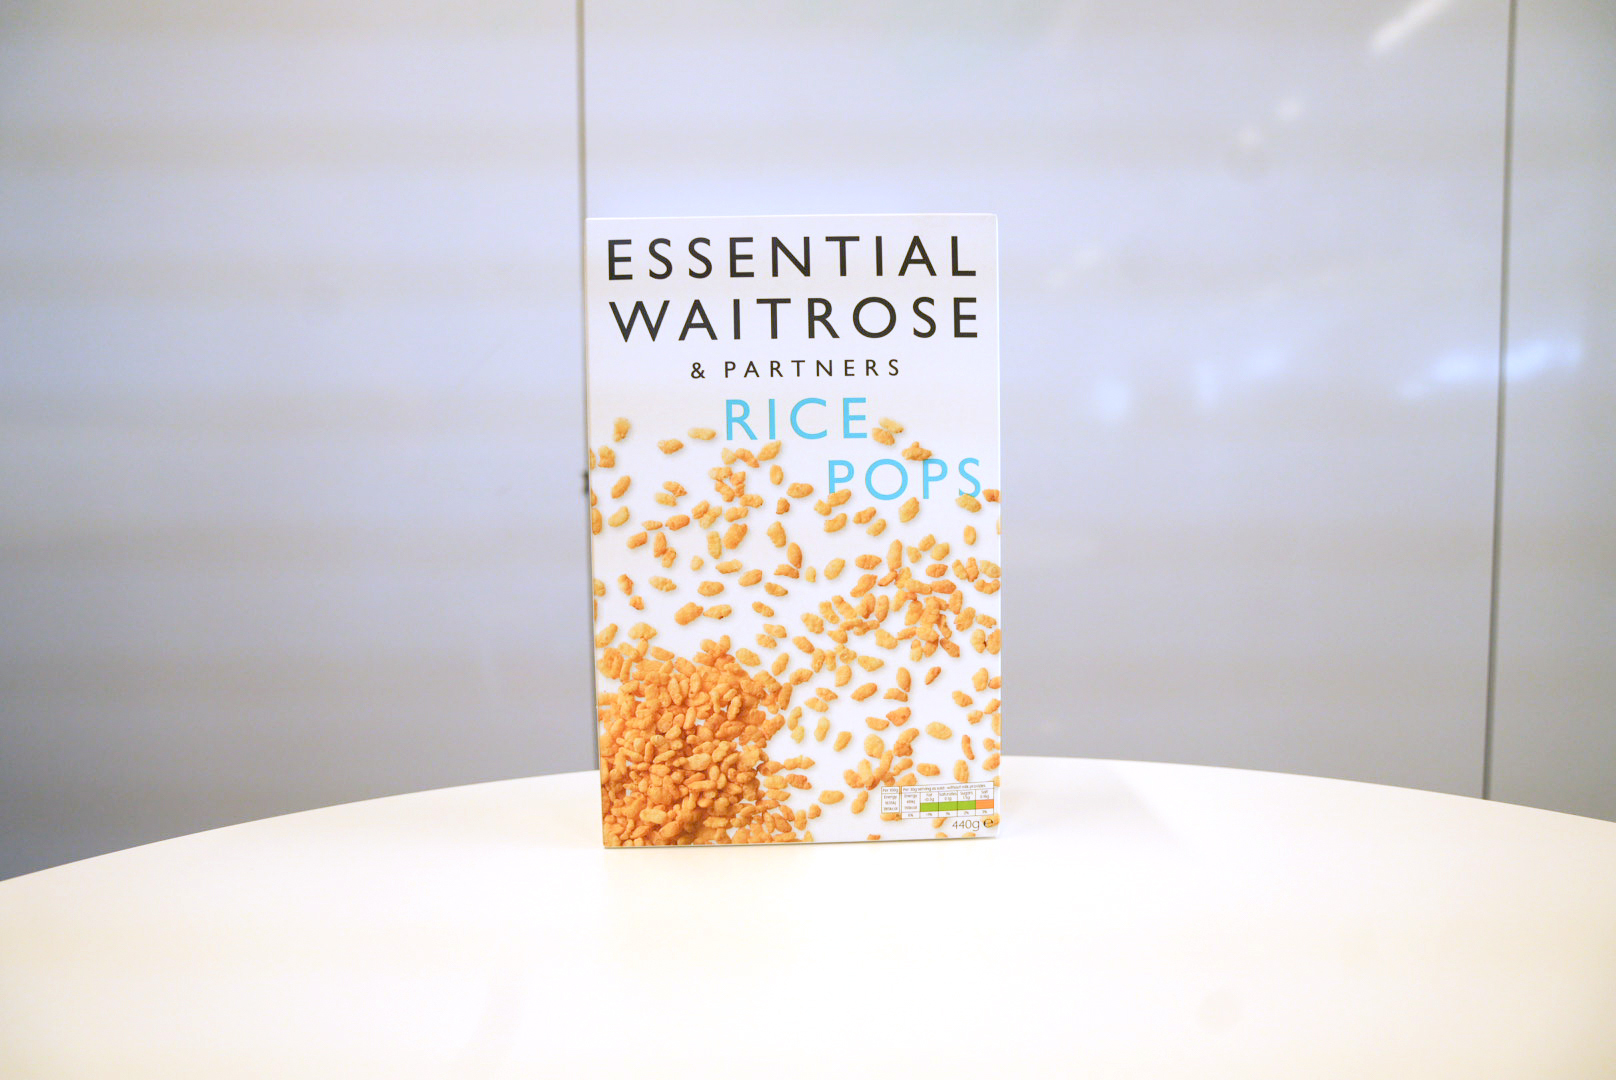 Waitrose's were expensive but the taste and texture stood up well